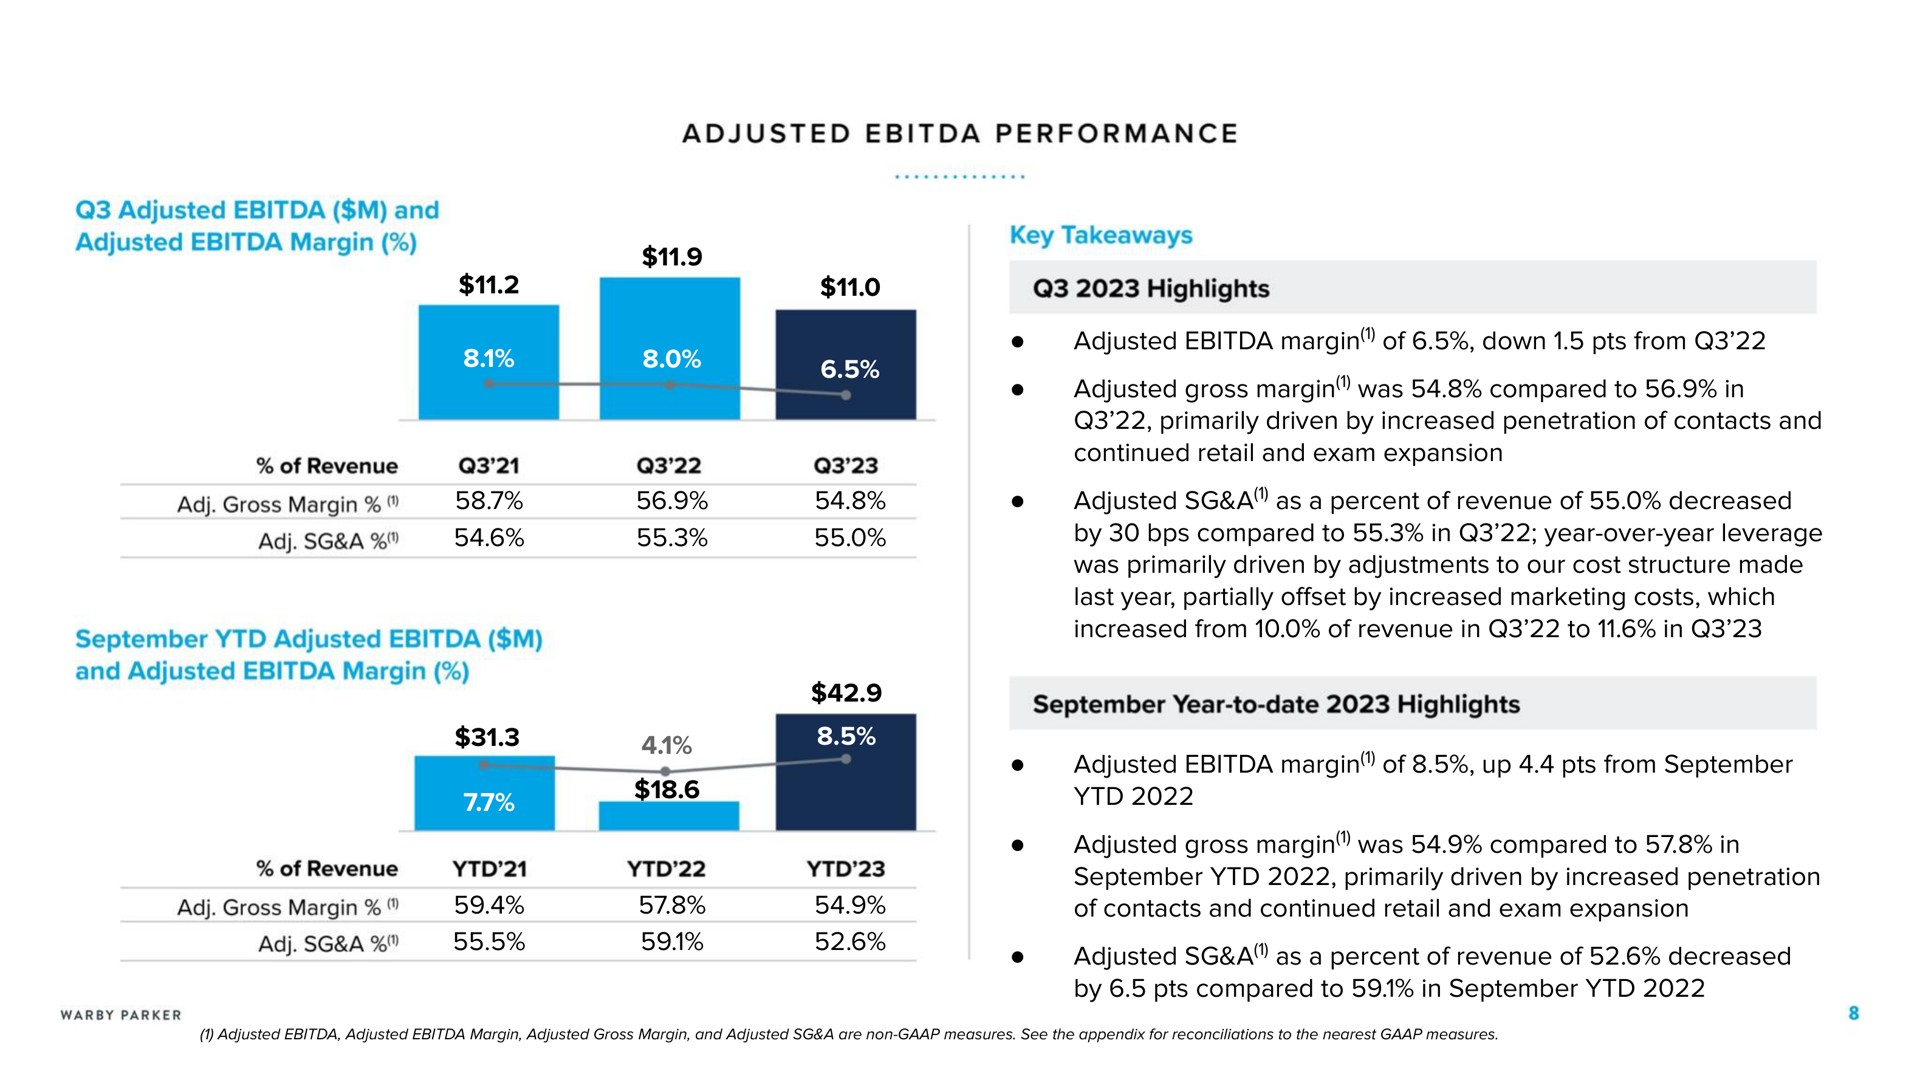 adjusted performance highlights a adjusted margin of down from adjusted gross margin was compared to in adjusted a as a percent of revenue of decreased year to date highlights adjusted margin of up from adjusted gross margin was compared to in adjusted a as a percent of revenue of decreased | Warby Parker